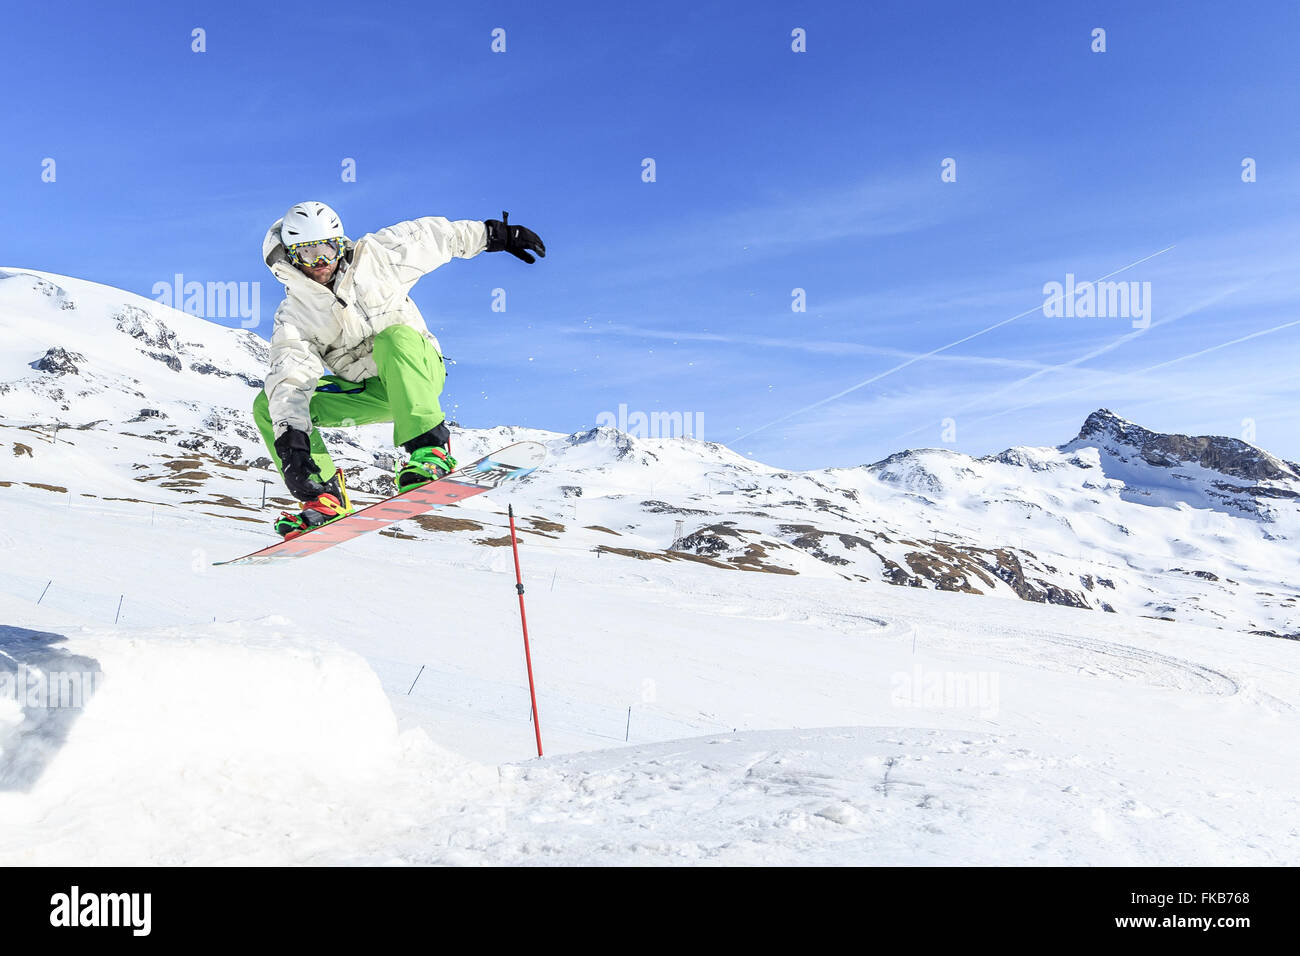 Snowboarding, Photographed in Breuil-Cervinia, Italy Stock Photo